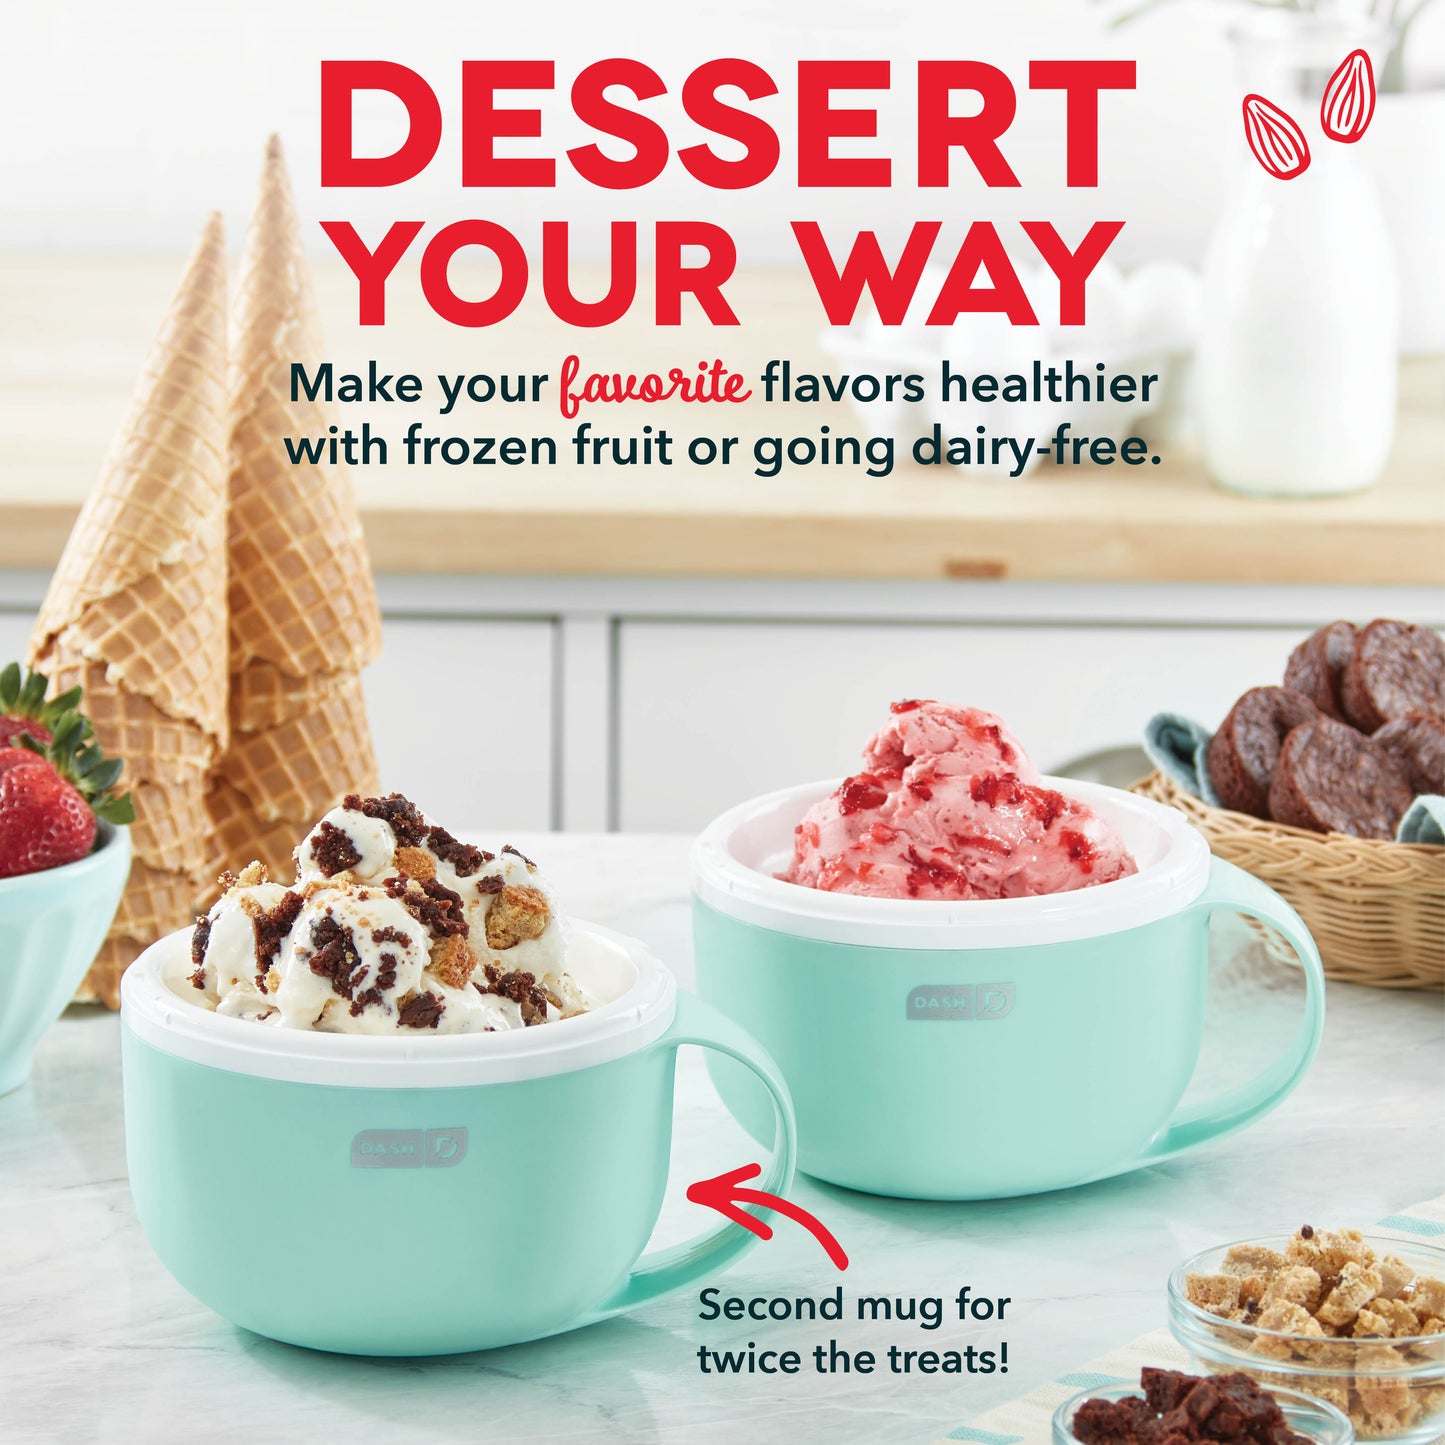 Dash My Mug Ice Cream Maker Product Review, Cottage Protein Ice Cream